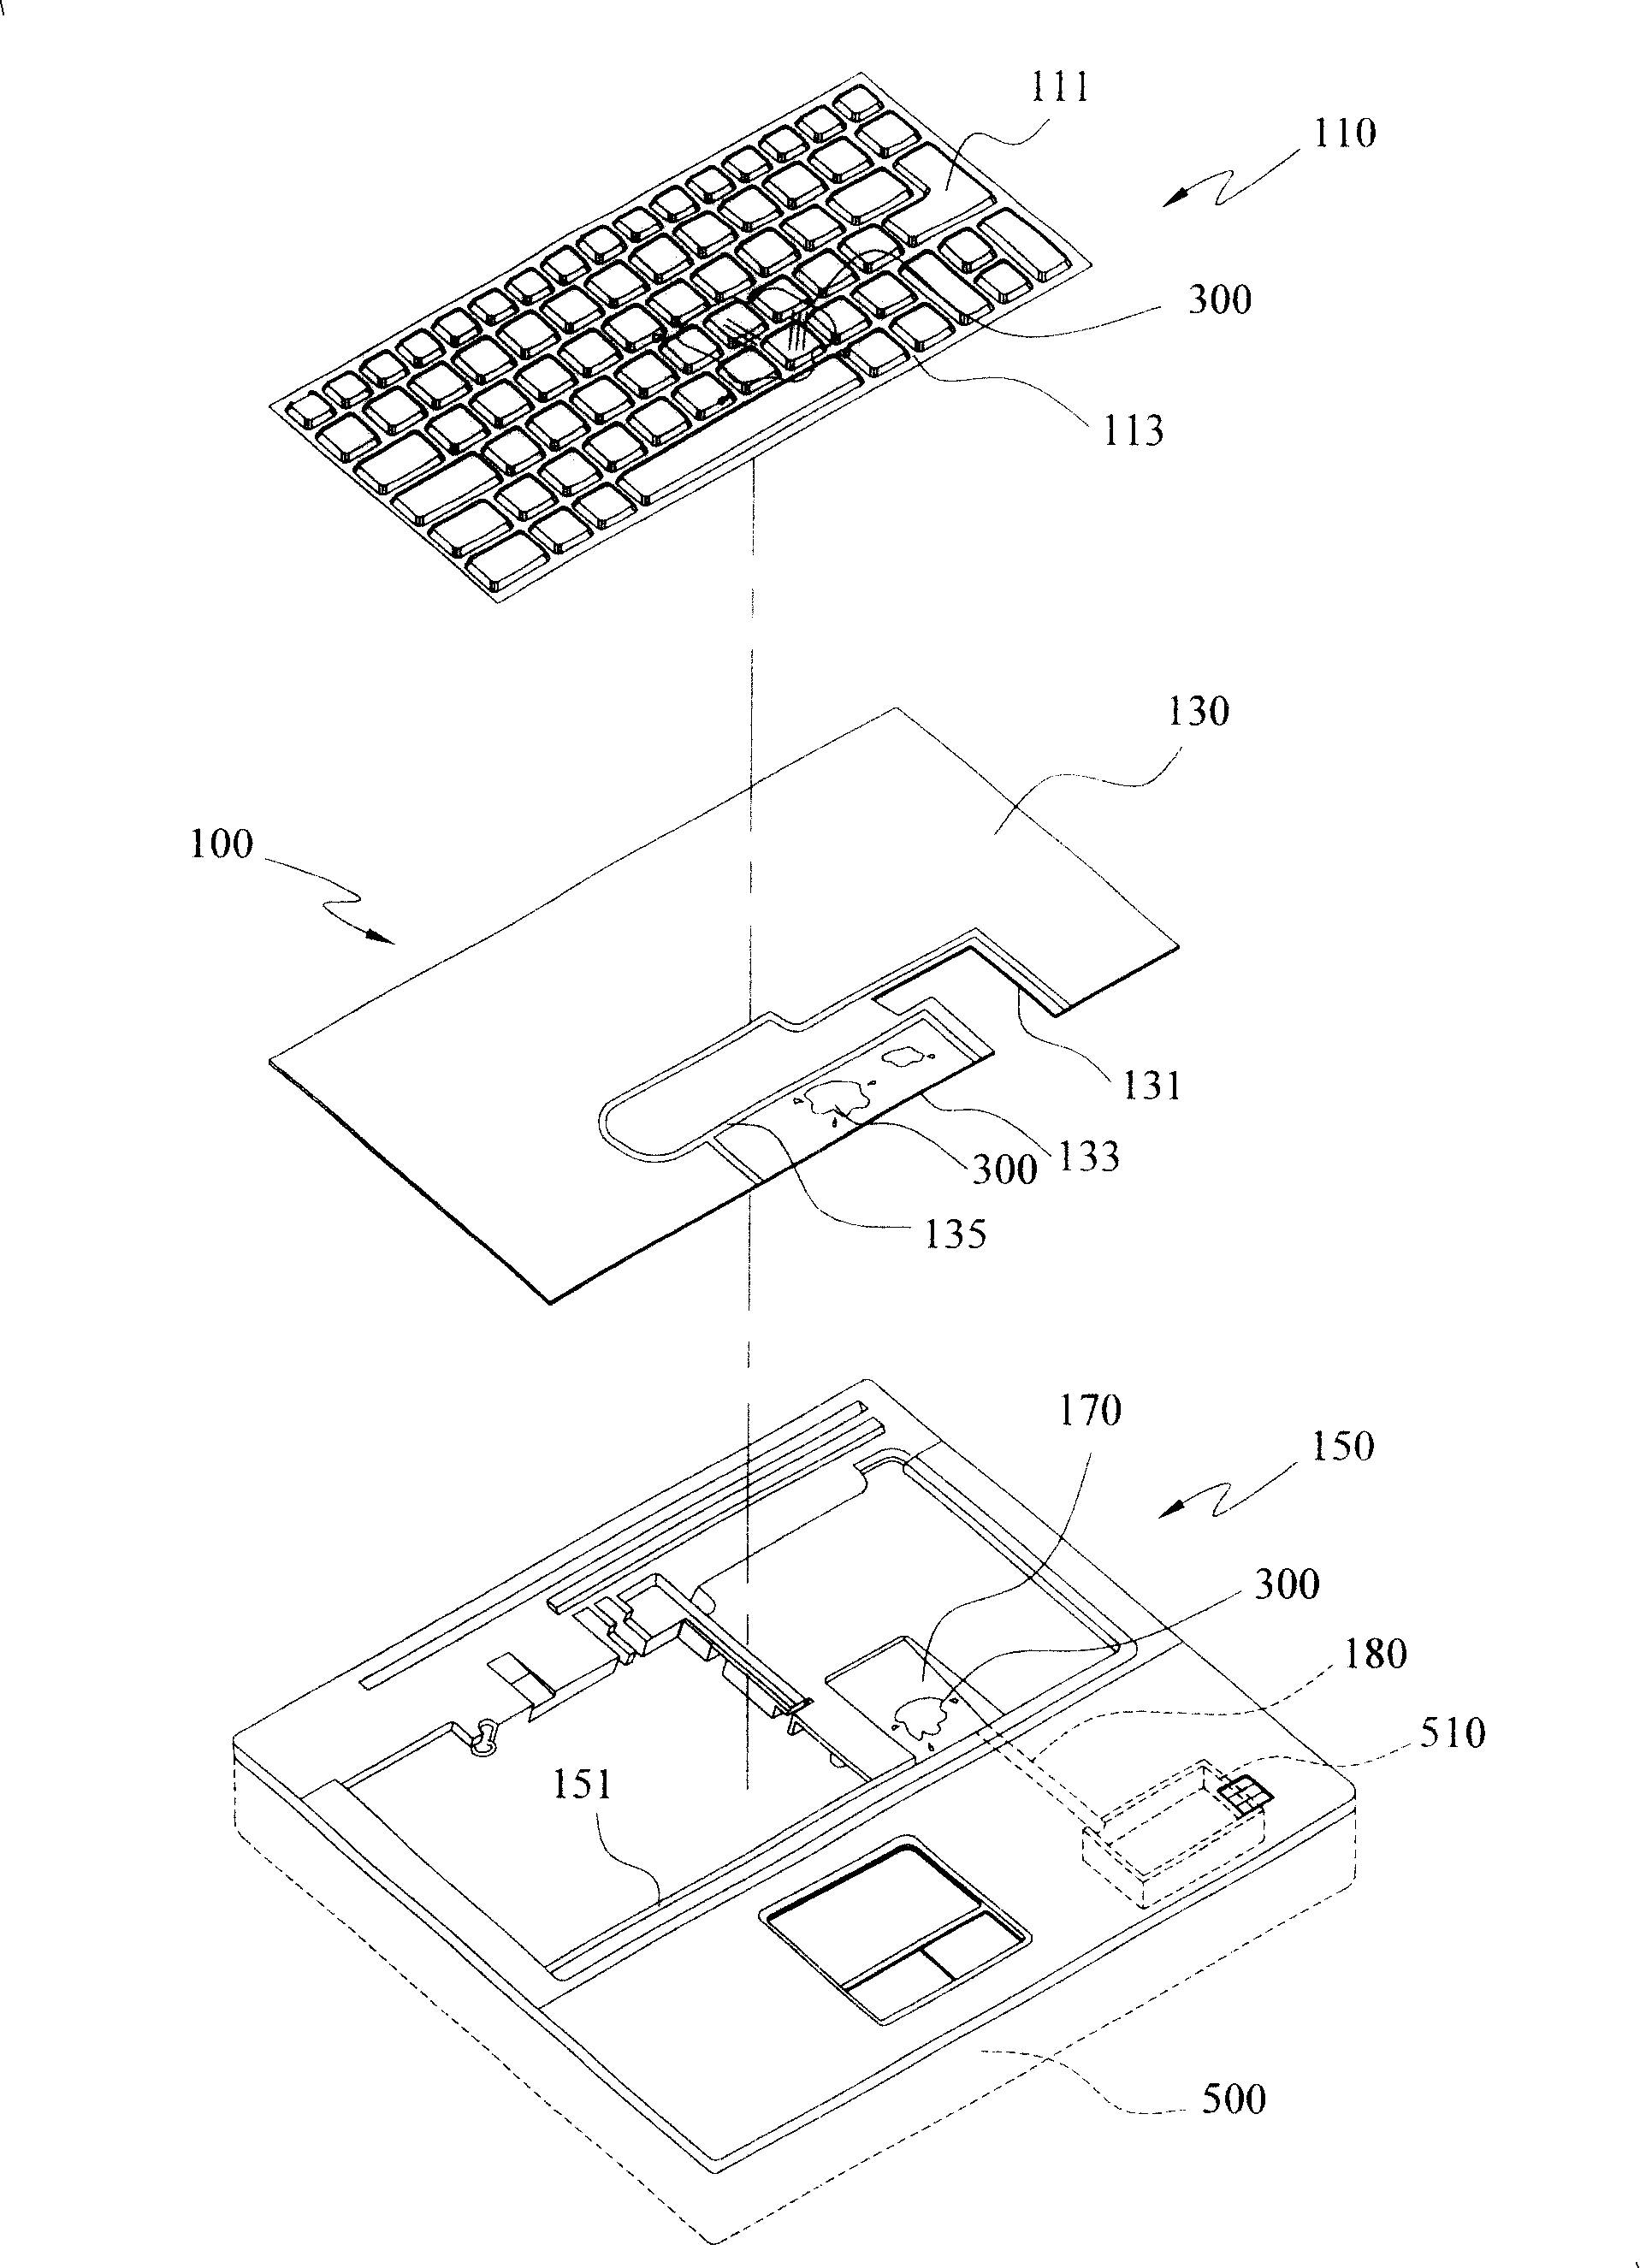 Keyboard with water-proof structure